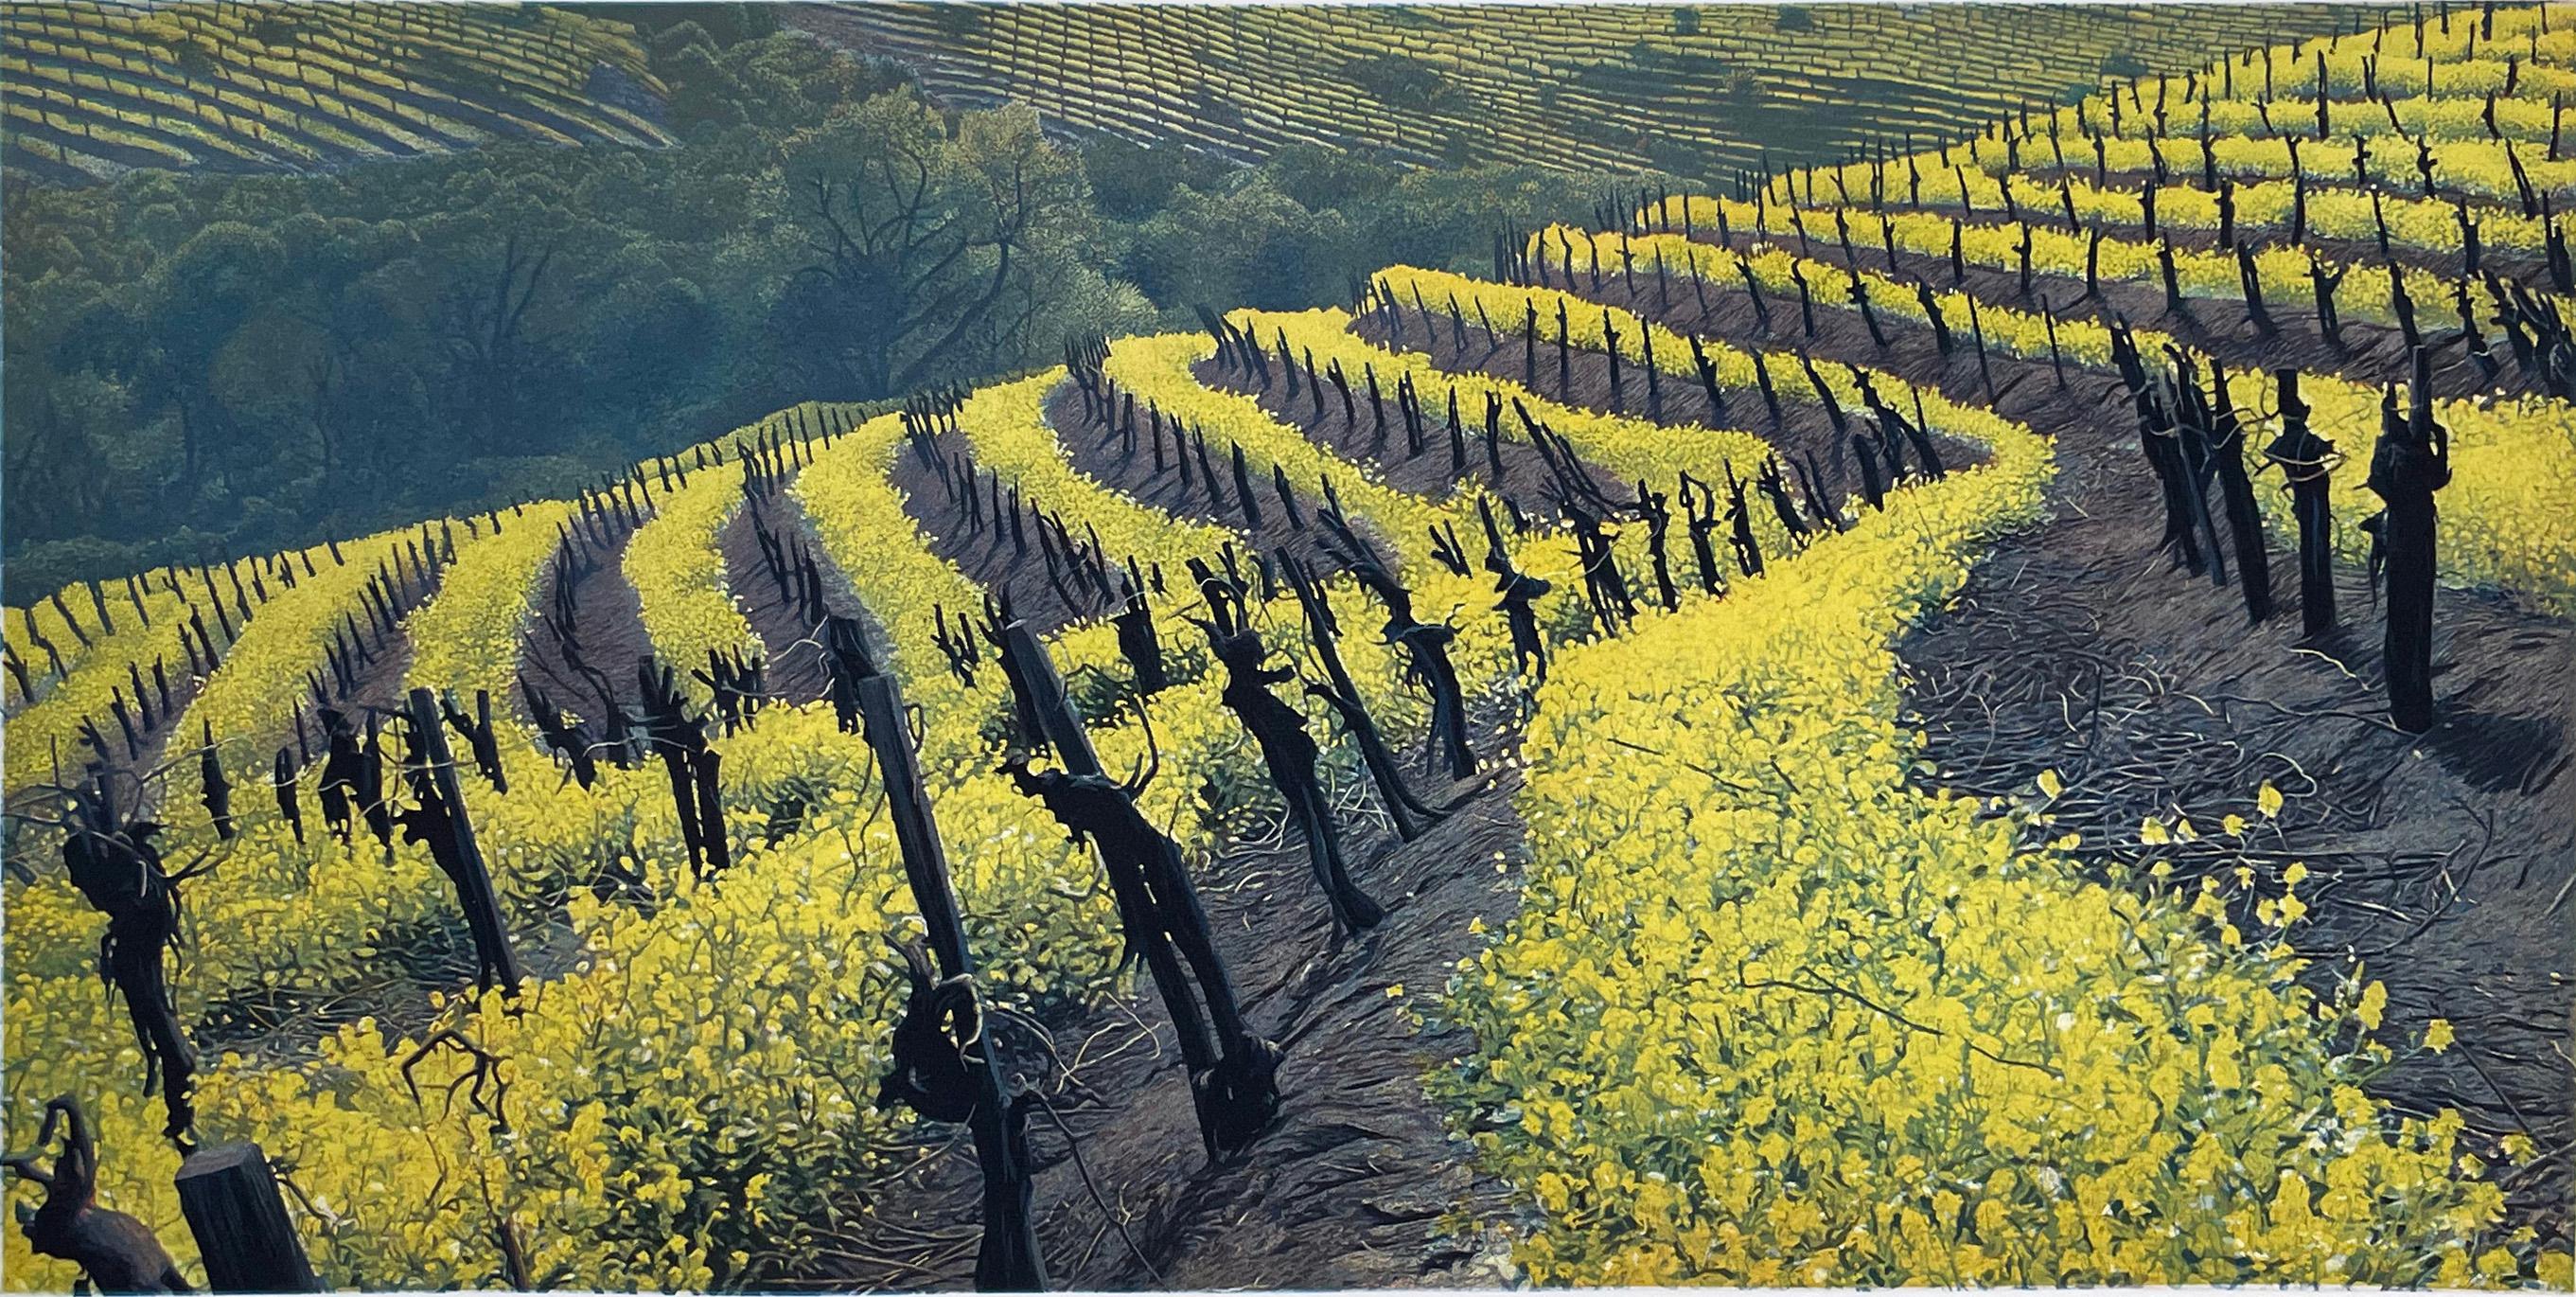 Signed and numbered etching and aquatint from the edition of 250.
By the end of February the the rows of still dormant grape vines are delineated by bright yellow mustard flowers. These vineyards are in the hills southwest of Napa.

Born in